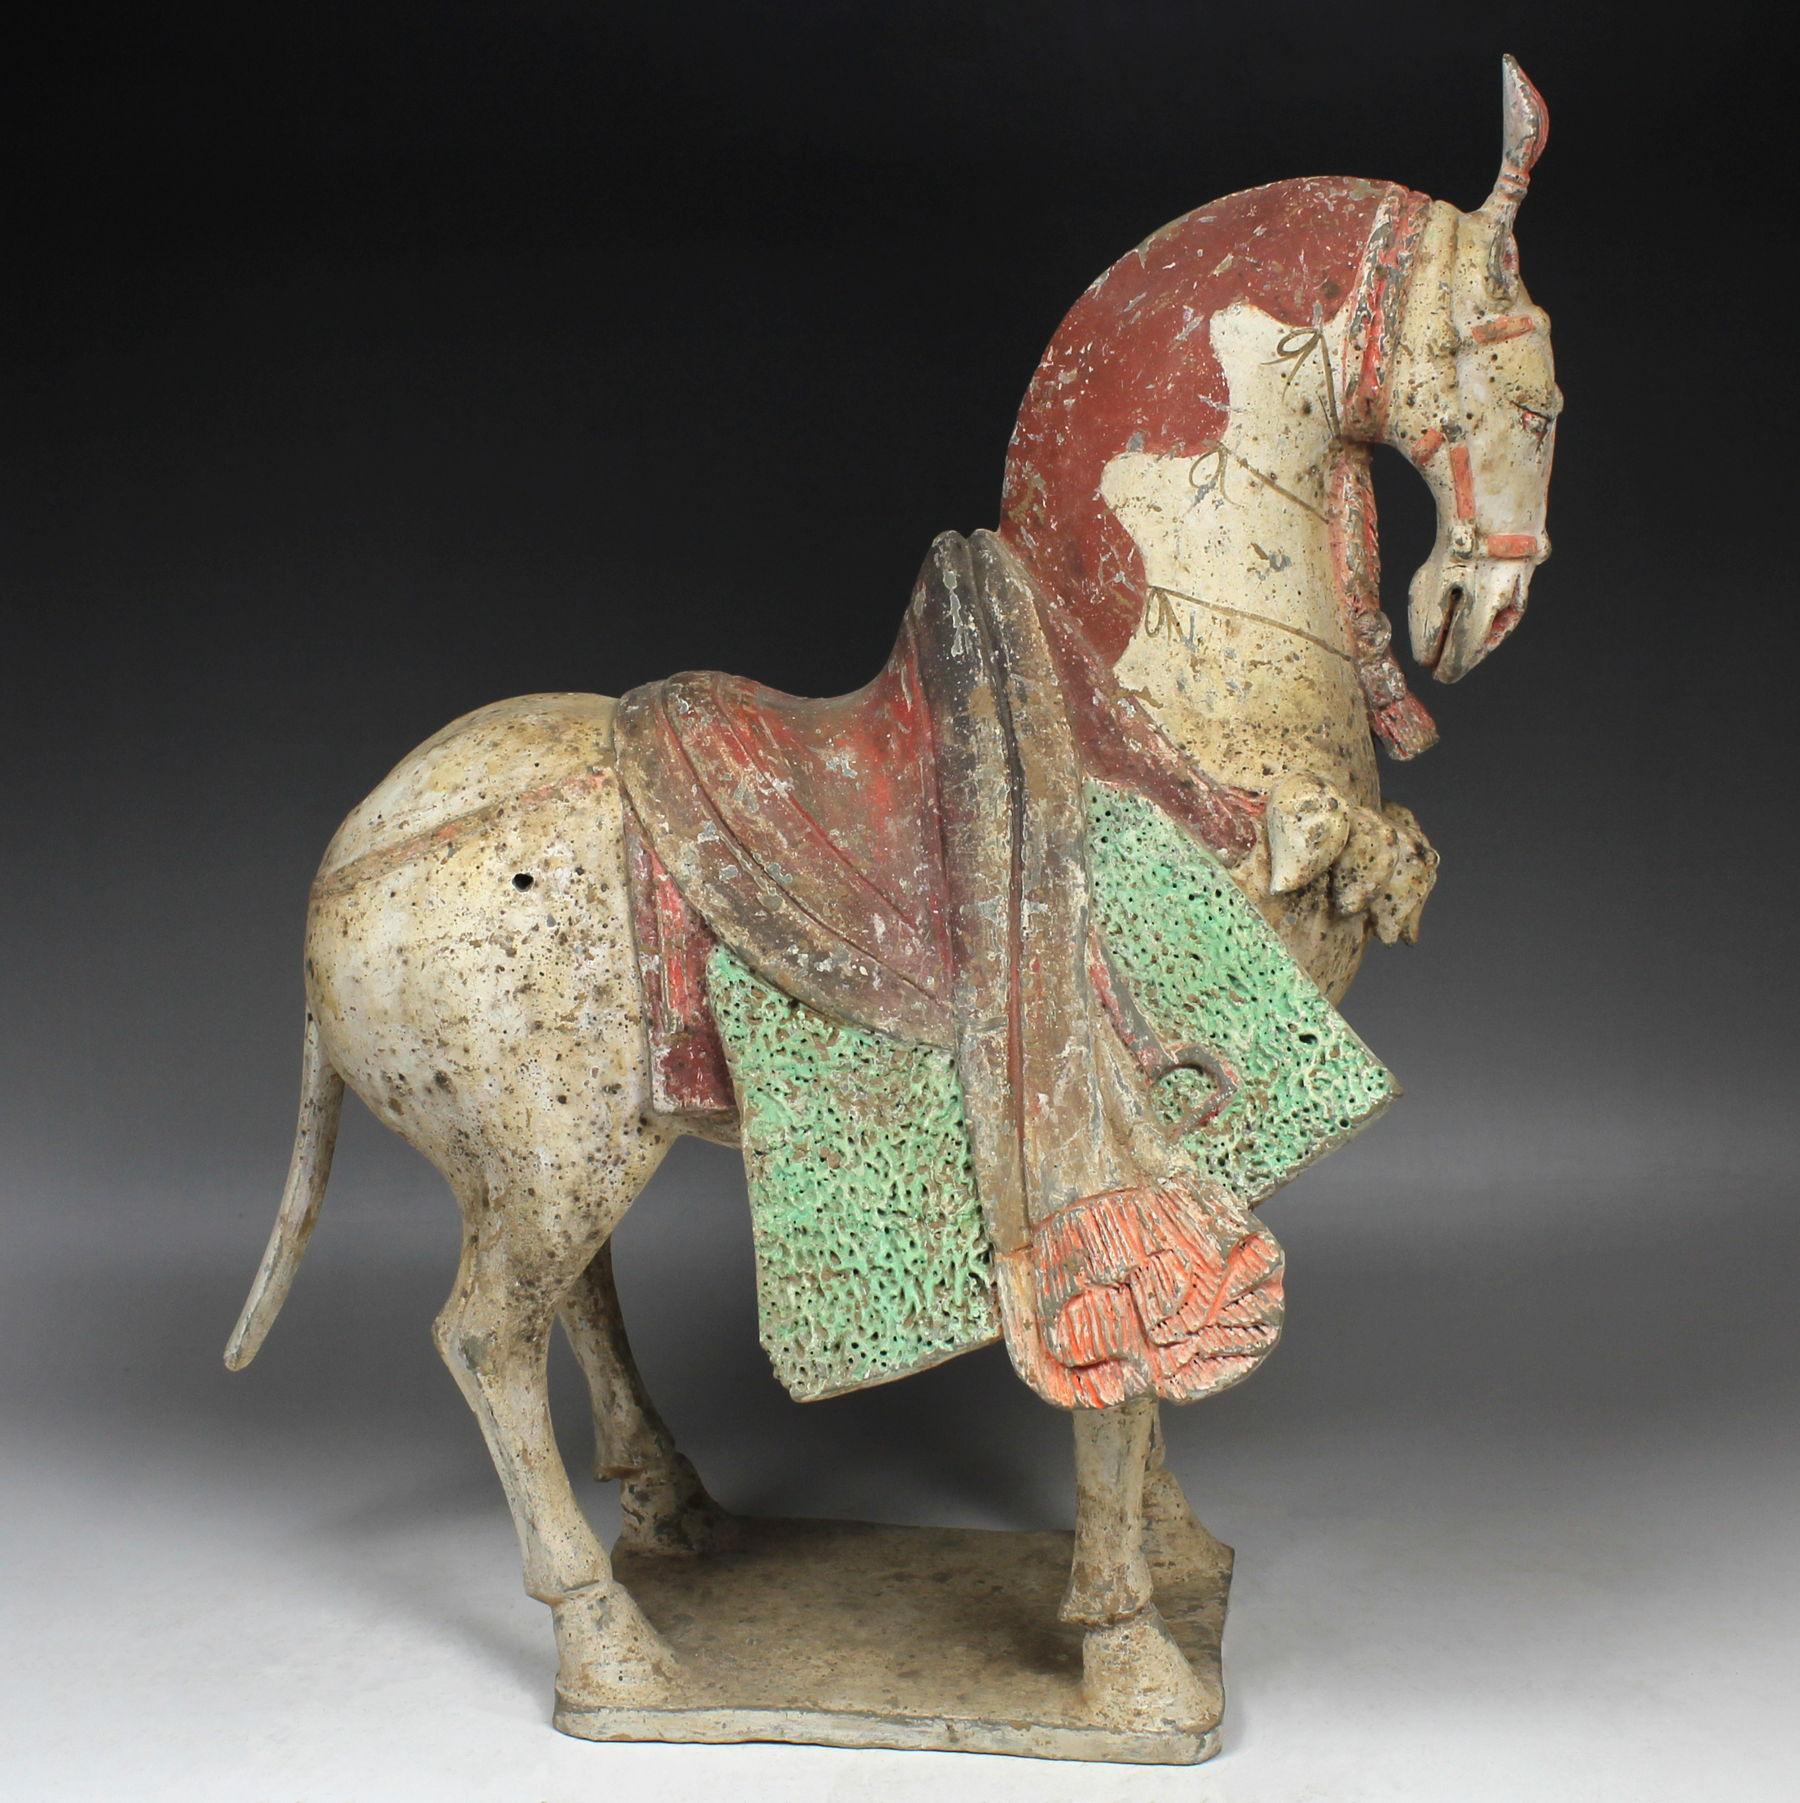 ITEM: Statuette of a horse
MATERIAL: Pottery
CULTURE: Chinese, Northern Wei Dynasty
PERIOD: 	386 – 535 A.D
DIMENSIONS: 404 mm x 350 mm x 230 mm
CONDITION: Good condition. Includes Thermoluminescence test by Laboratory Kotalla (Reference